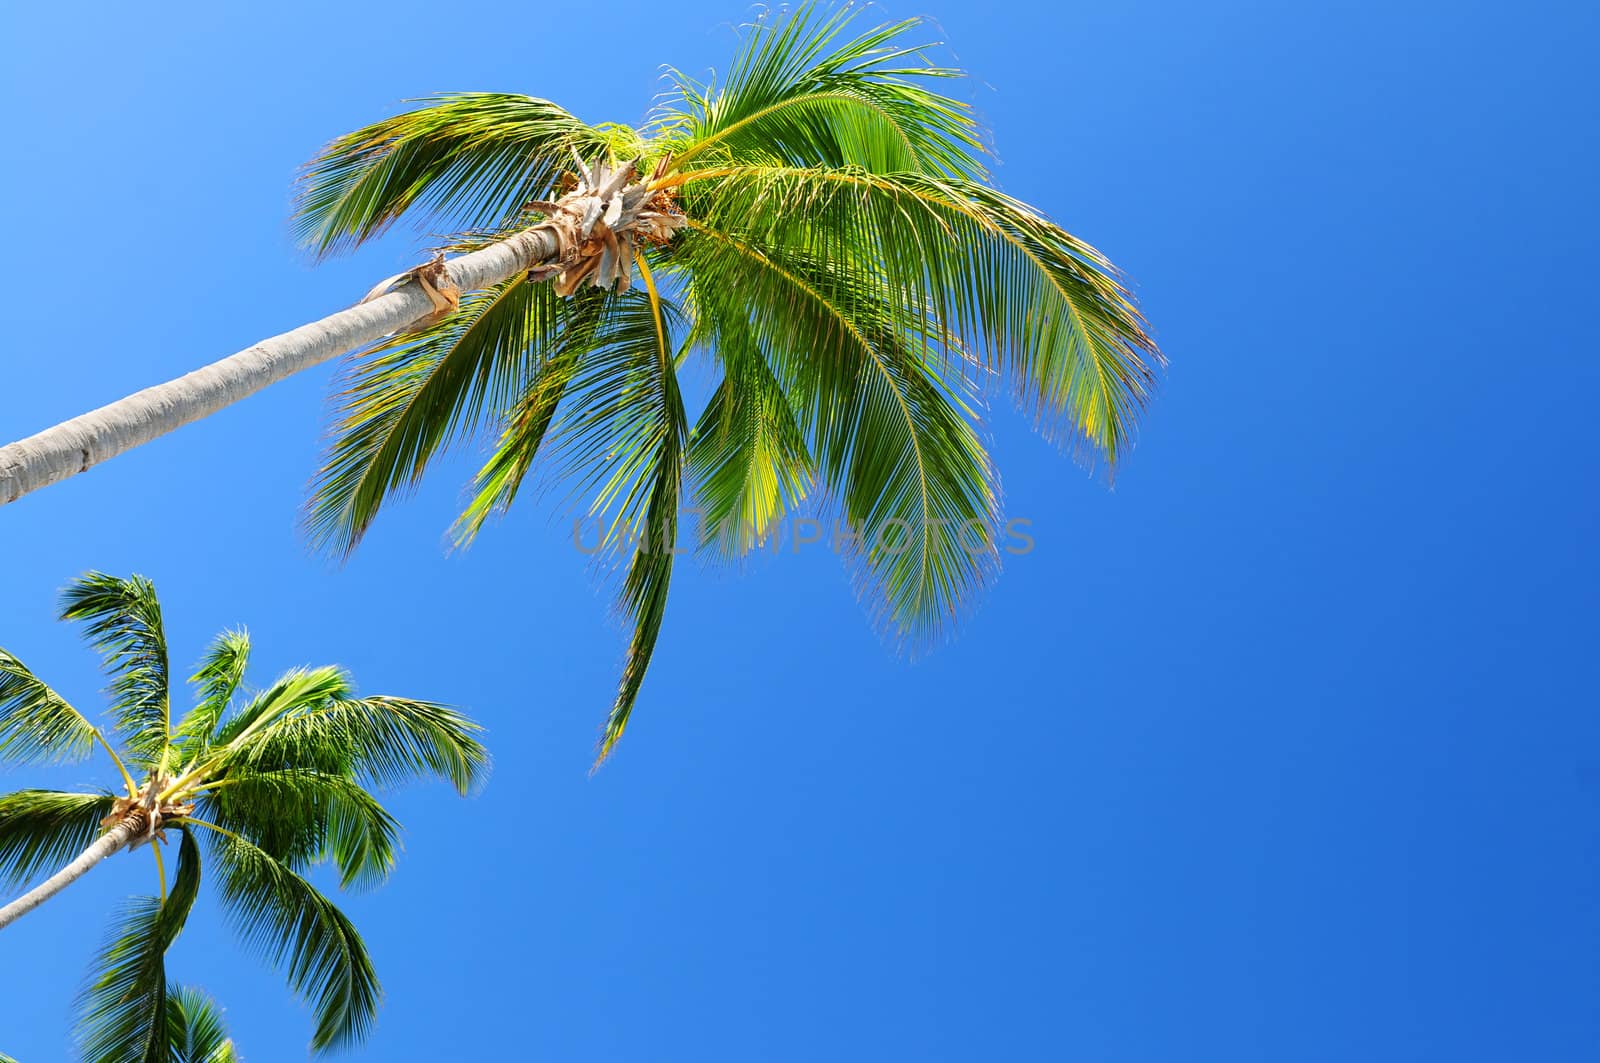 Background of bright blue sky with palm tree tops